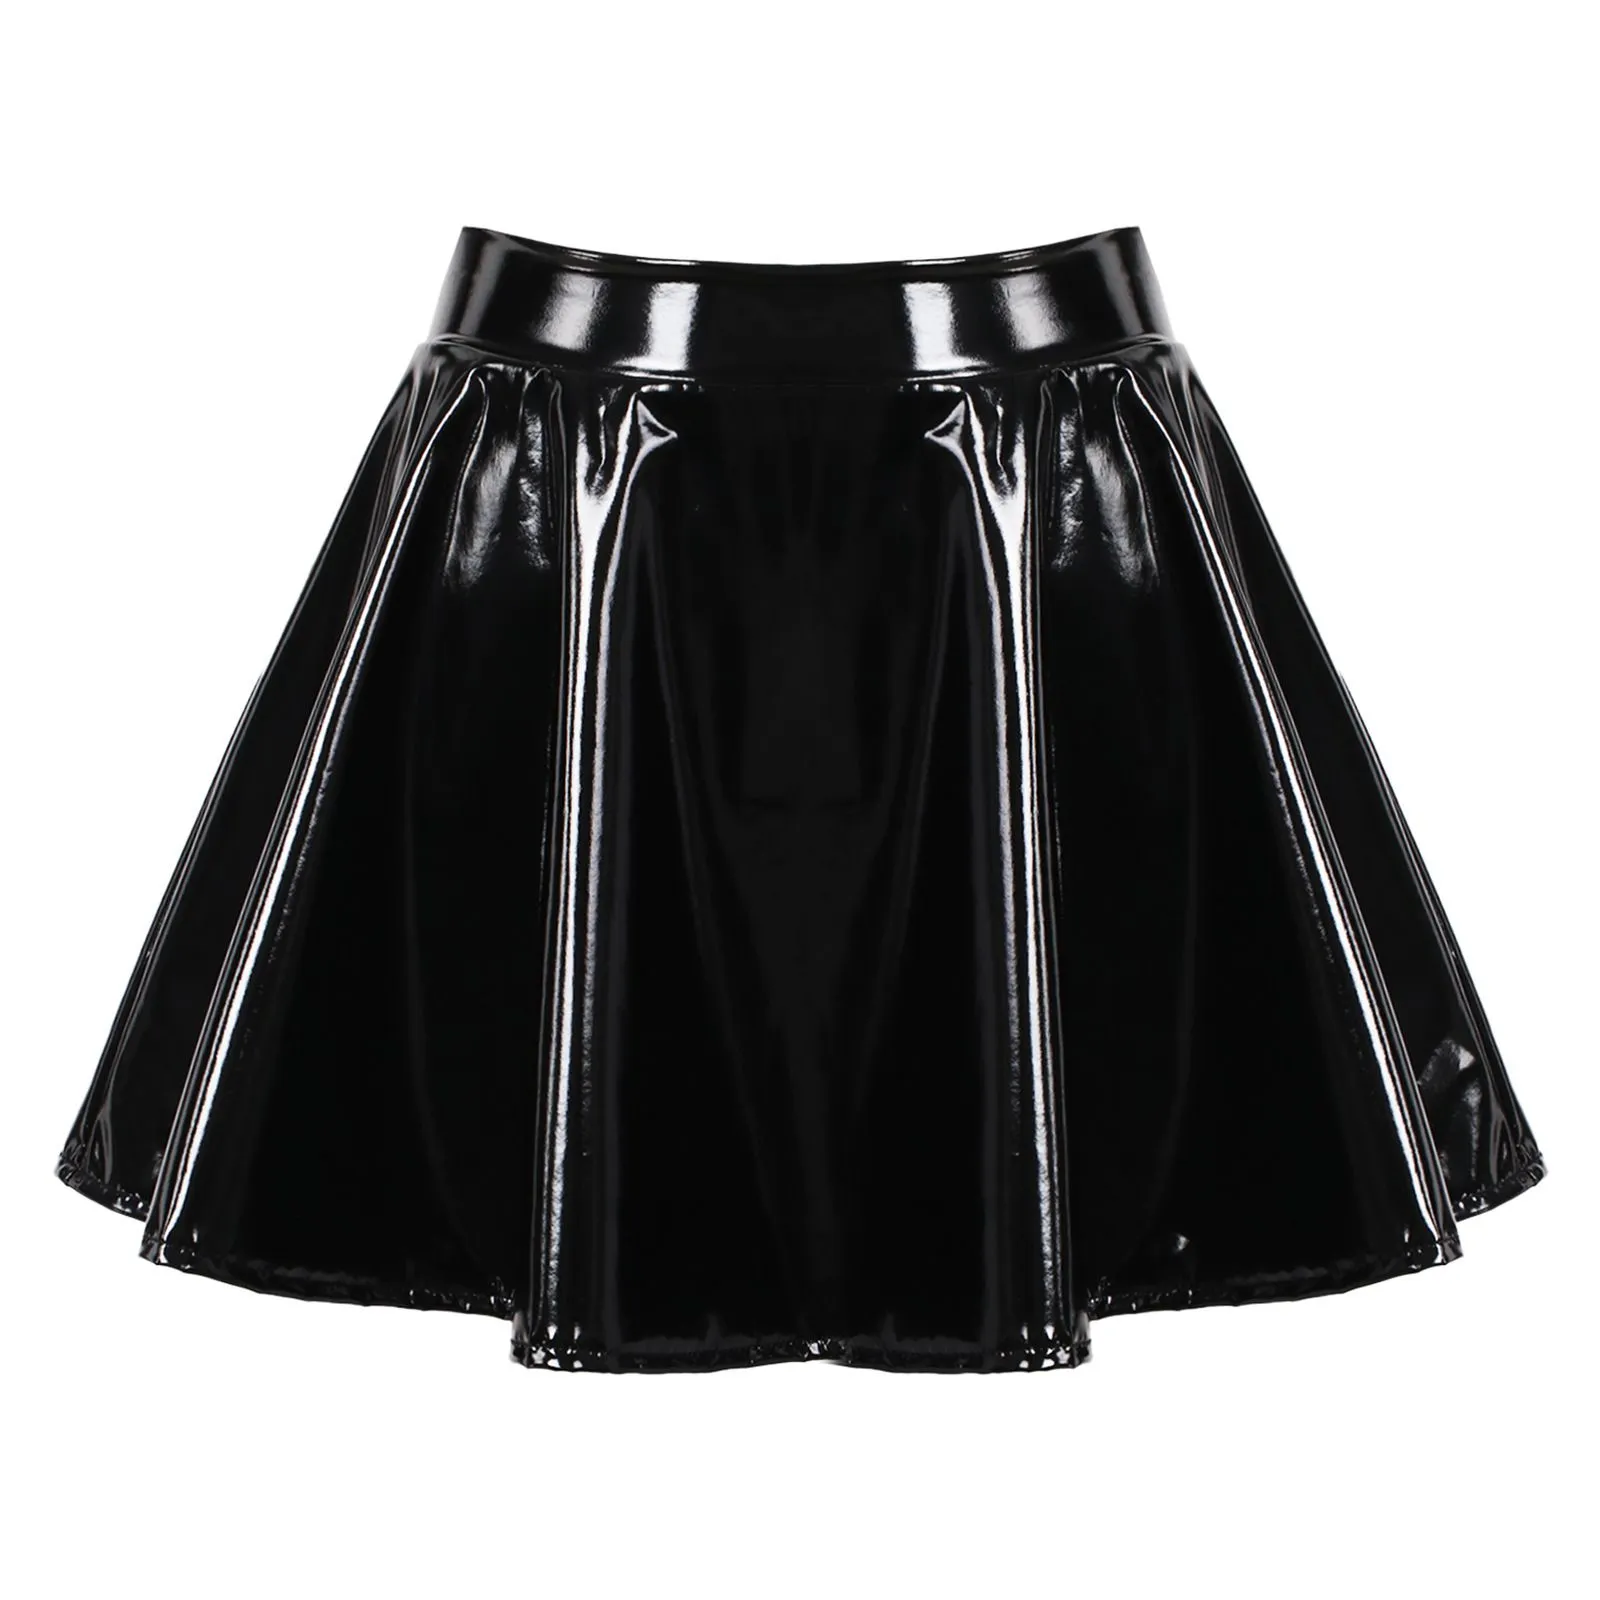 Skirts Womens Latex Skirt for Rave Party Club Dance Stage Performance Costume Clubwear Woman Wetlook Patent Leather Flared Mini Skirts